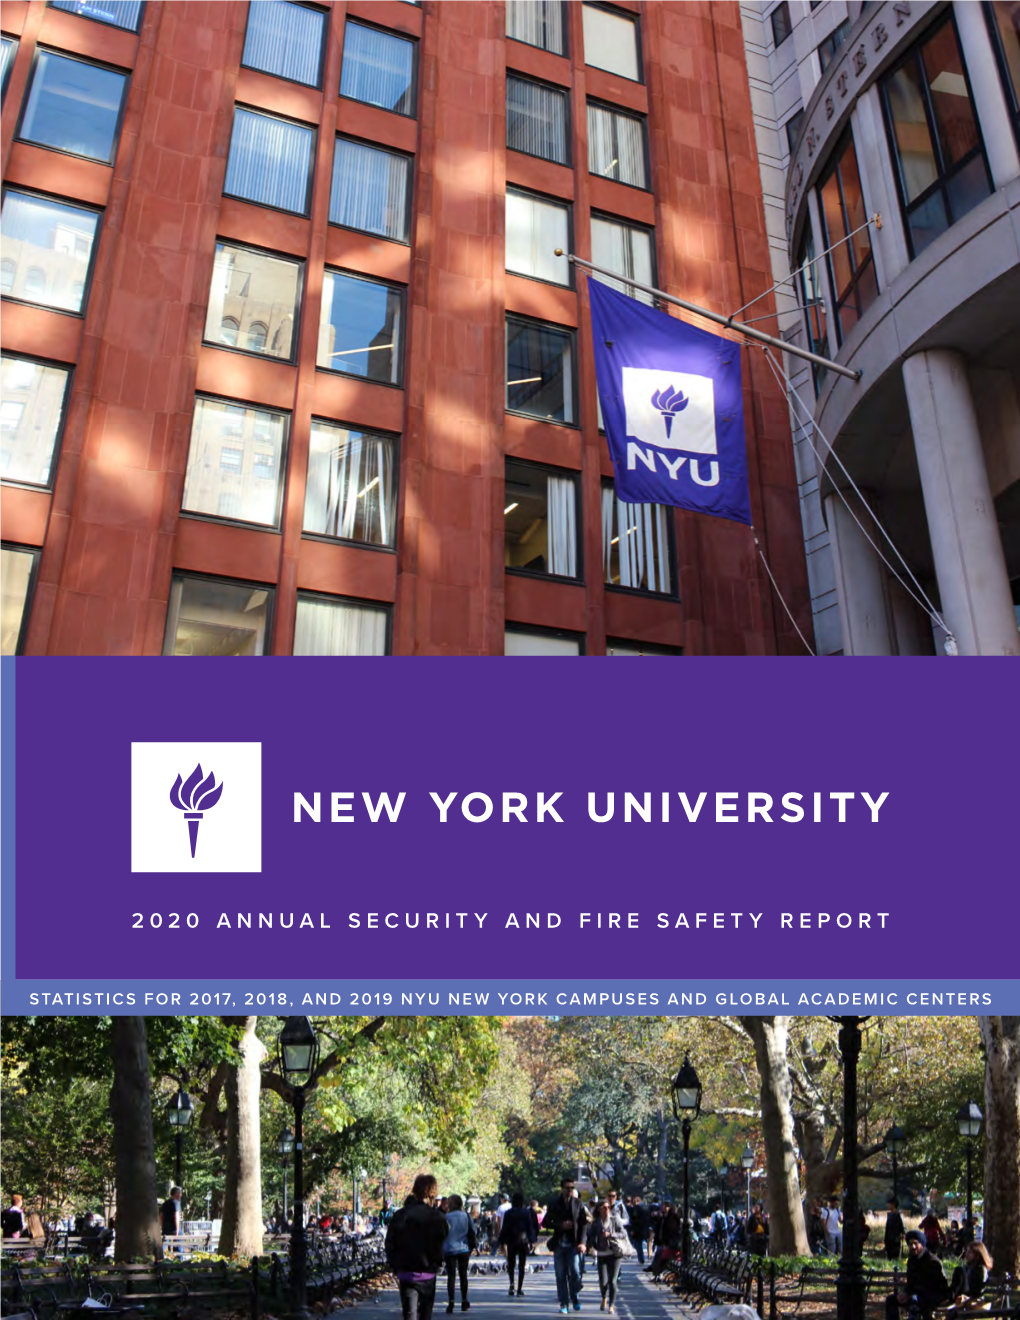 Nyu 2020 Annual Security and Fire Safety Report 2020 Annual Security and Fire Safety Report